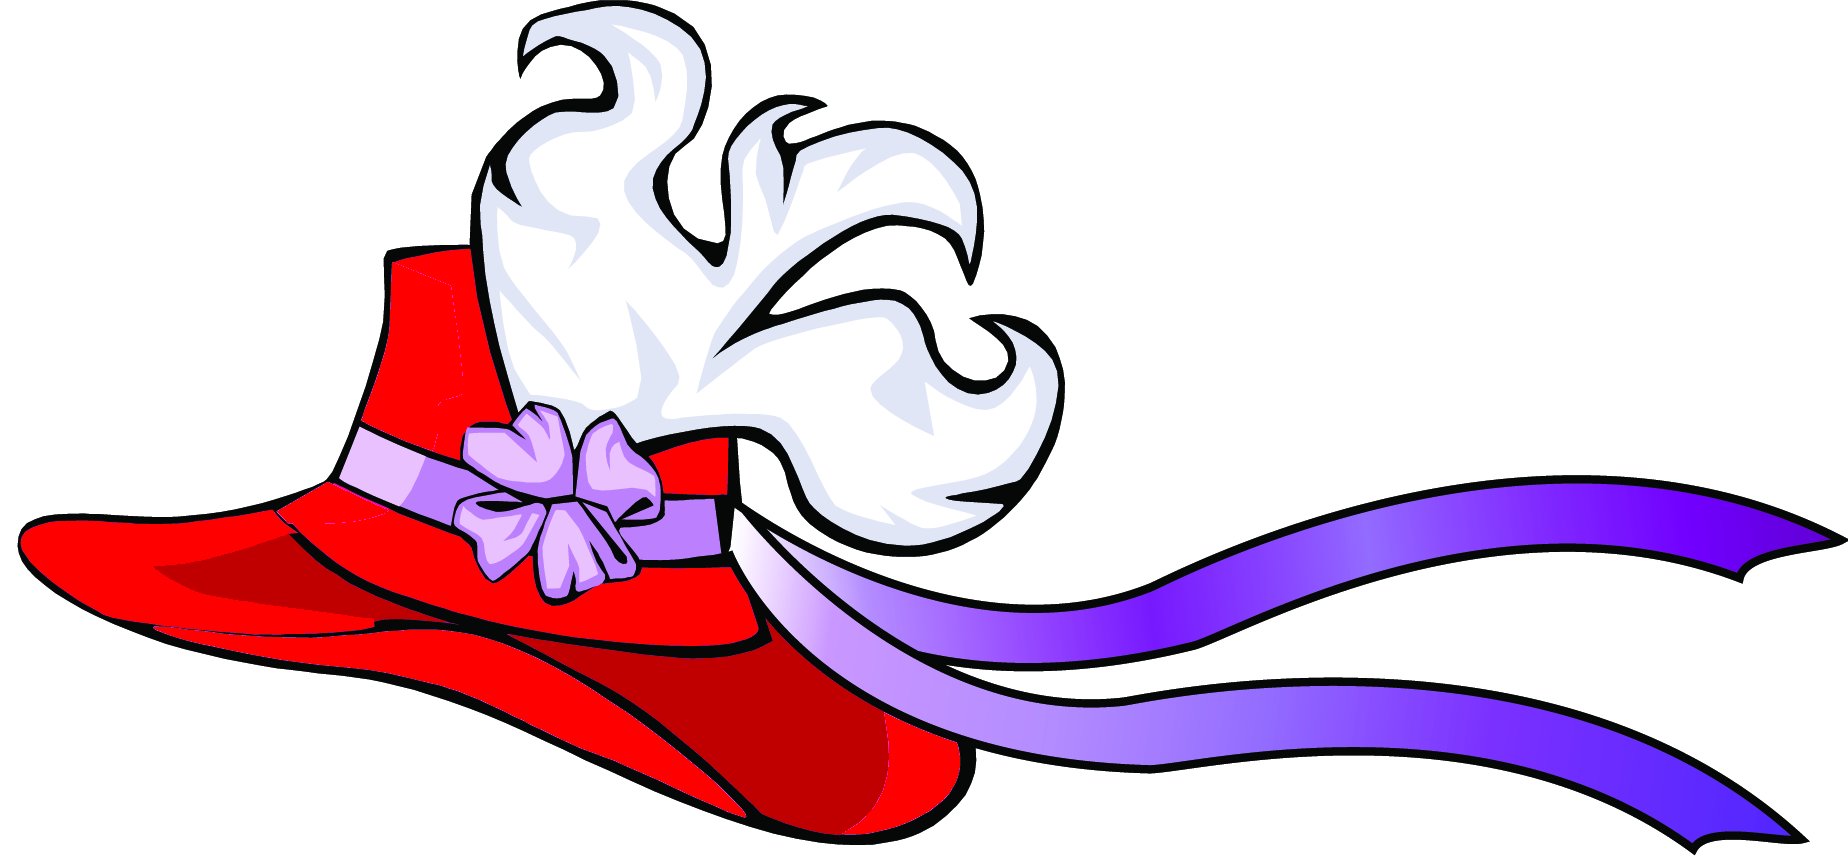 Red Hat Society - ClipArt Best.